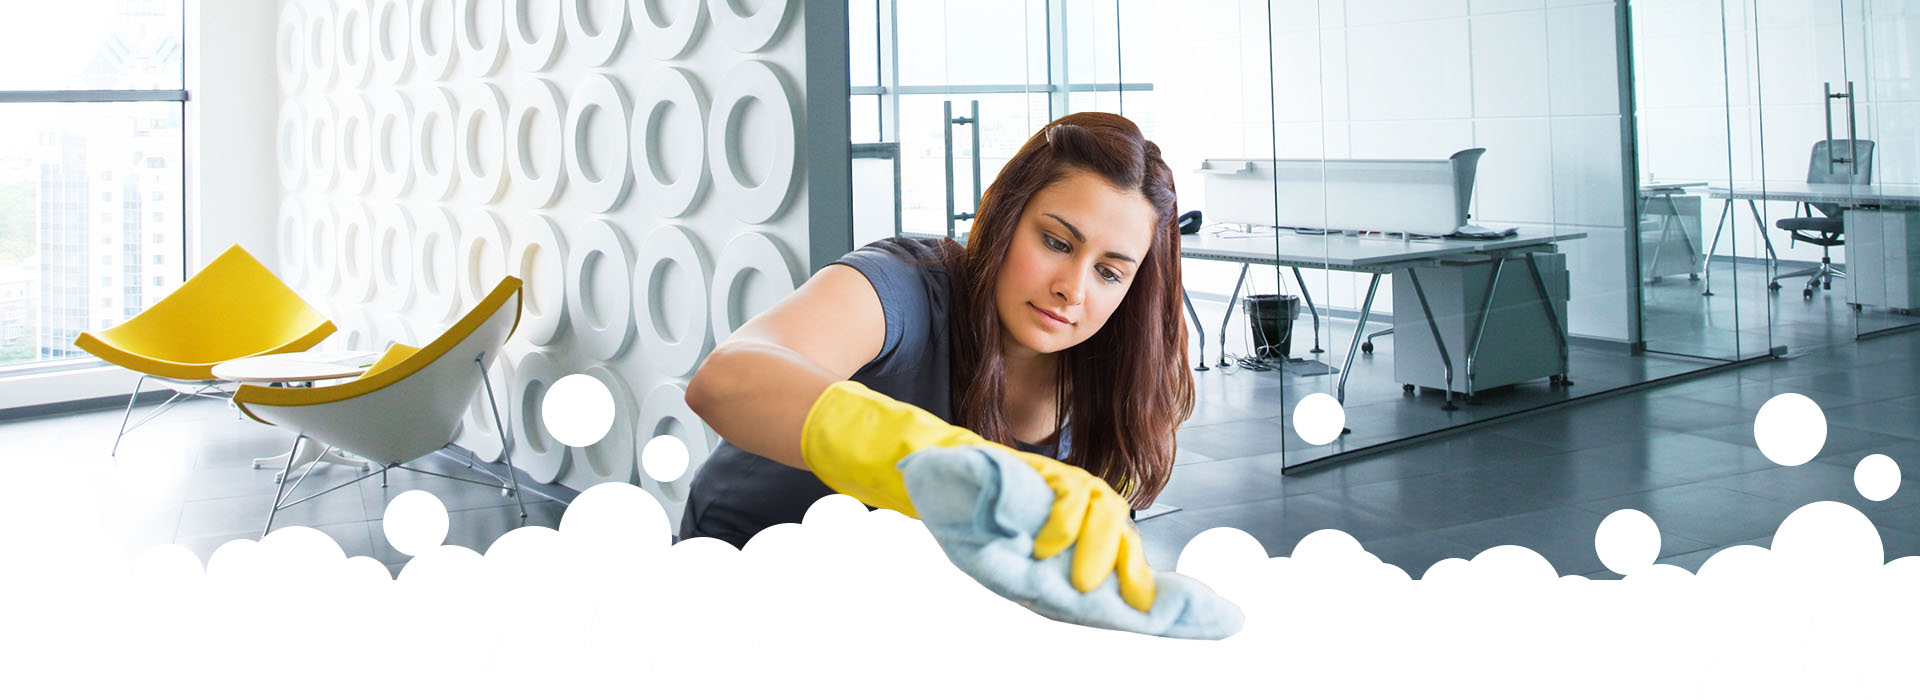 london-office-corporae-buro-company–cleaning-business-services